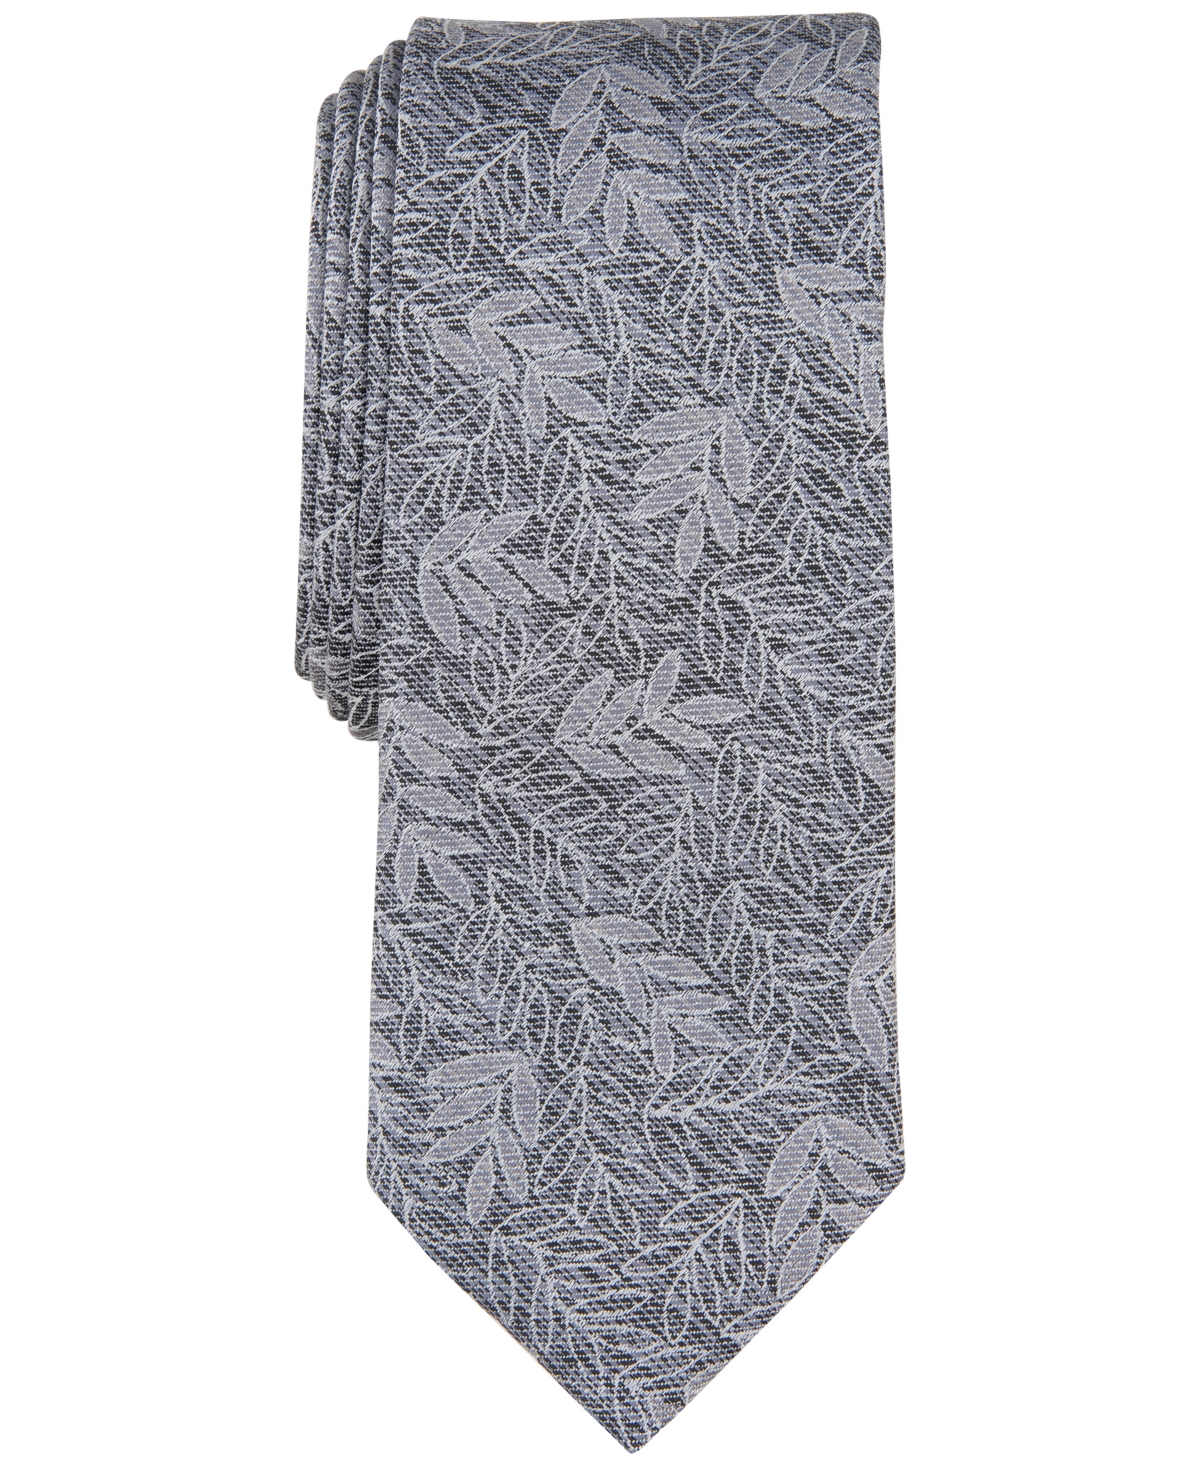 Men's Ocala Skinny Floral Tie, Created for Macy's - Melon